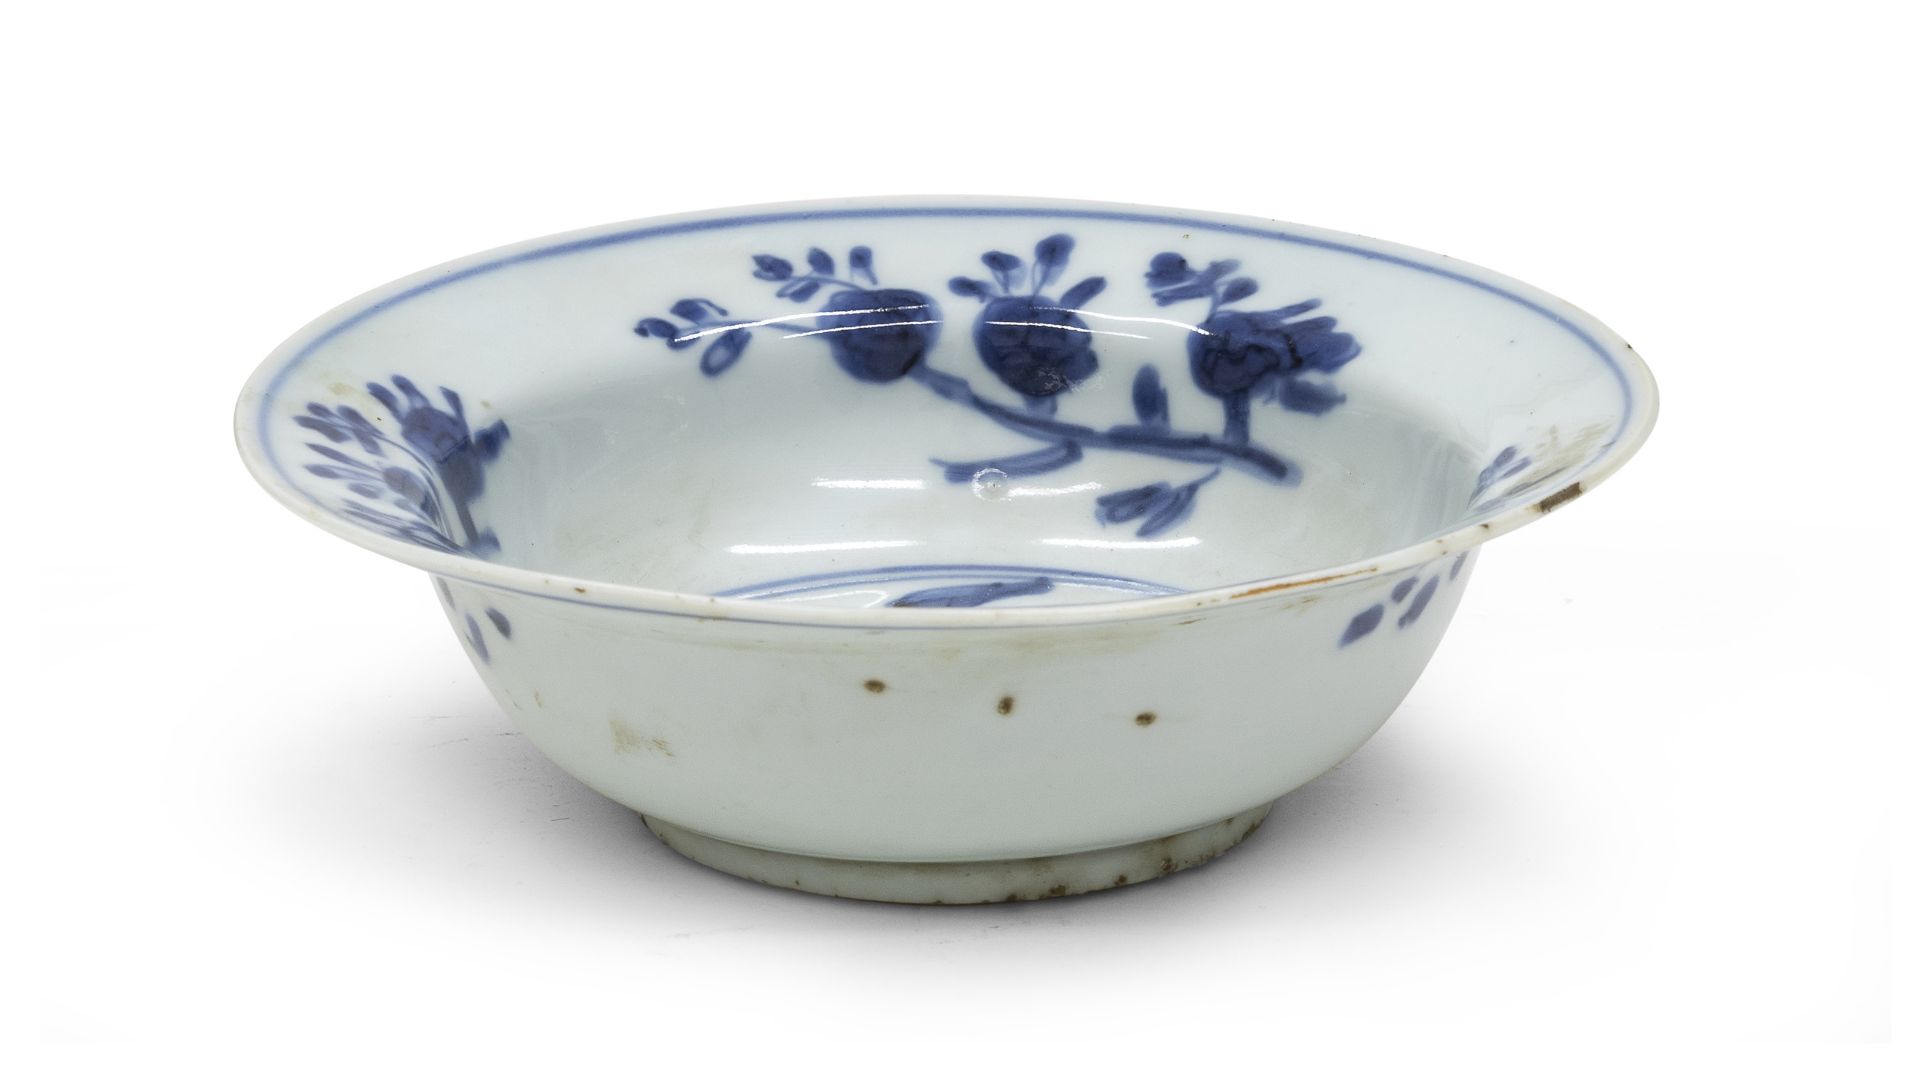 A CHINESE WHITE AND BLUE PORCELAIN BOWL 17TH CENTURY. CHIPS.